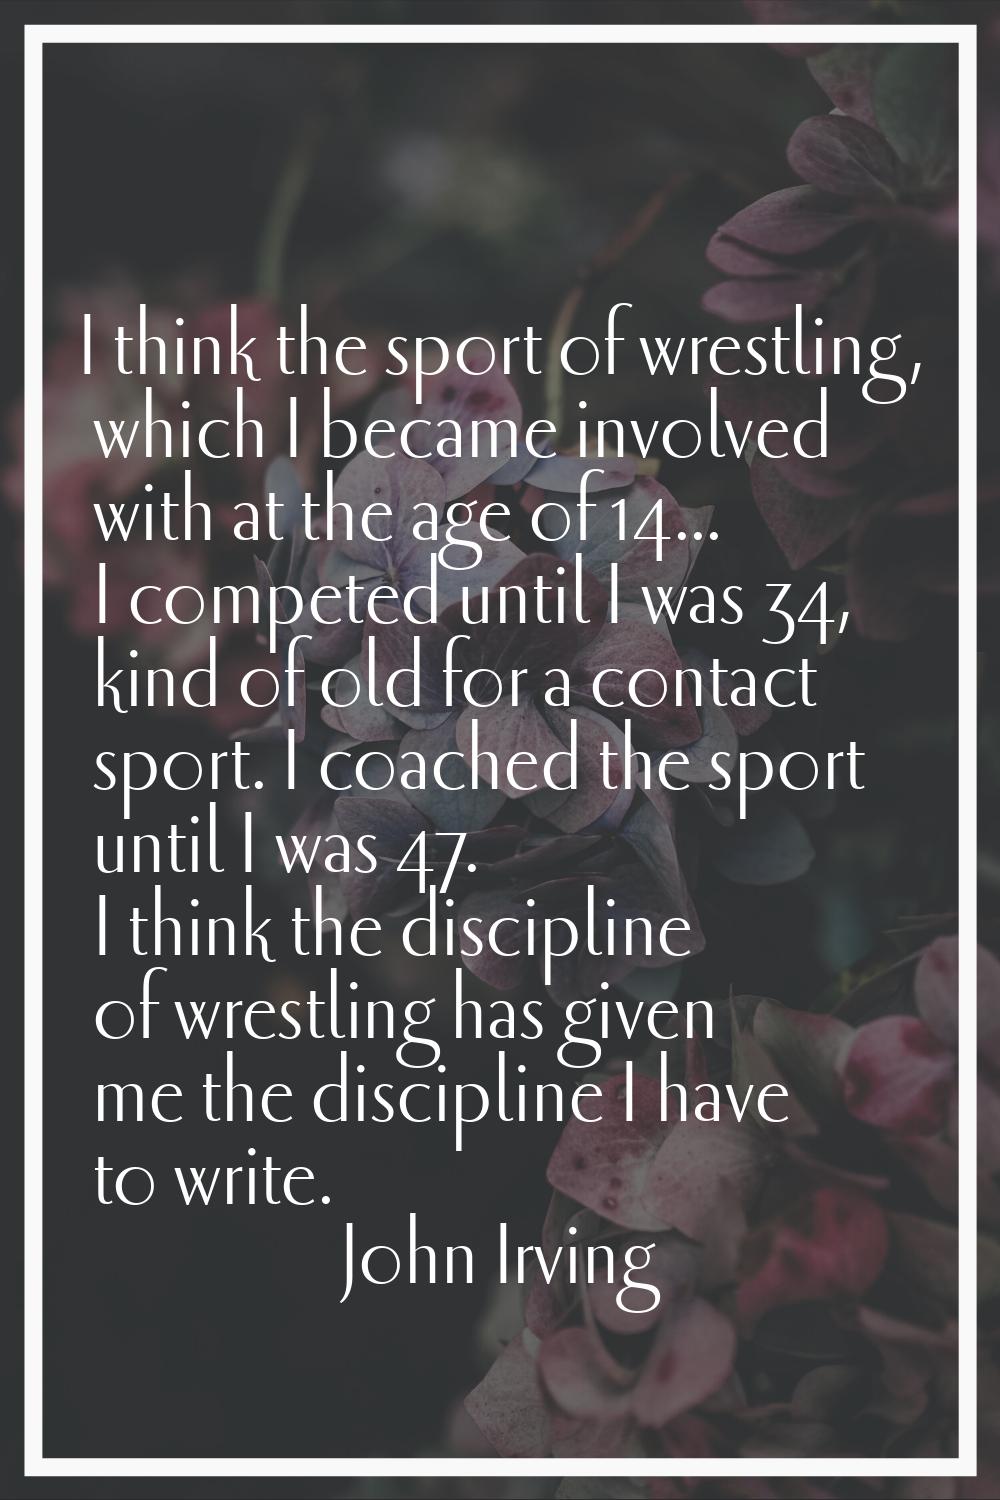 I think the sport of wrestling, which I became involved with at the age of 14... I competed until I